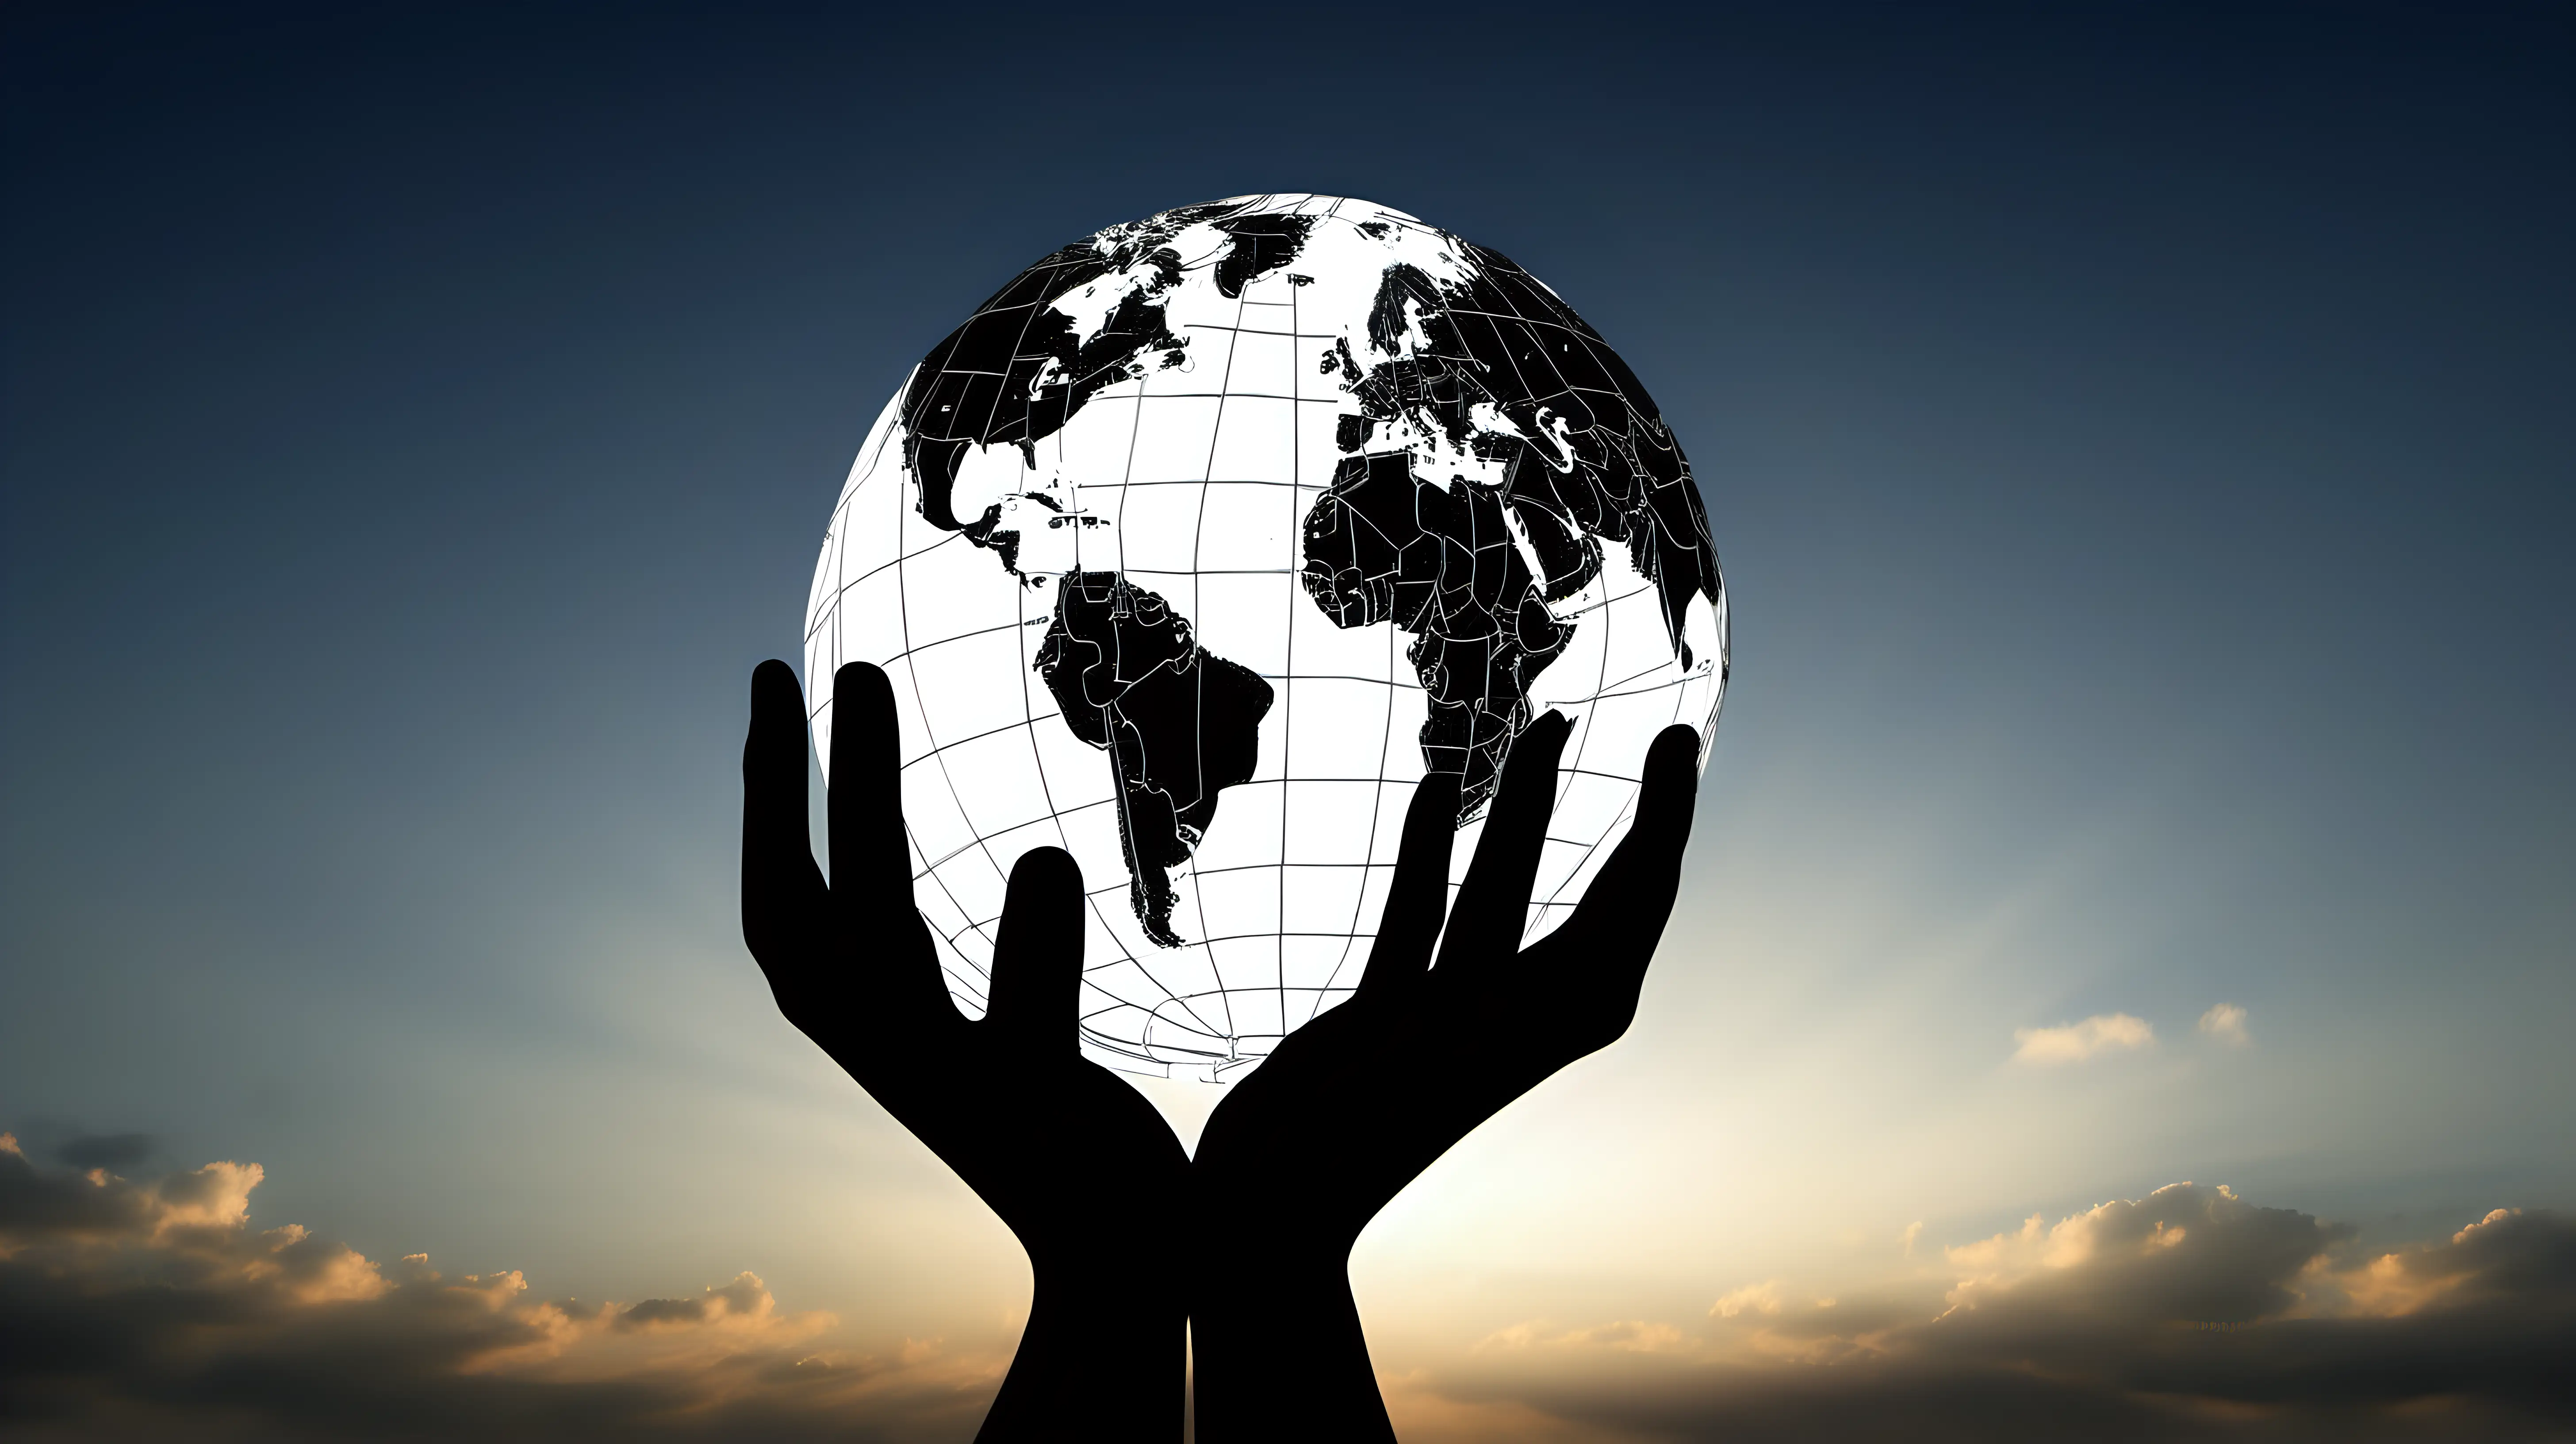 Silhouetted hands releasing a world sphere into the sky, symbolizing global aspirations and dreams.